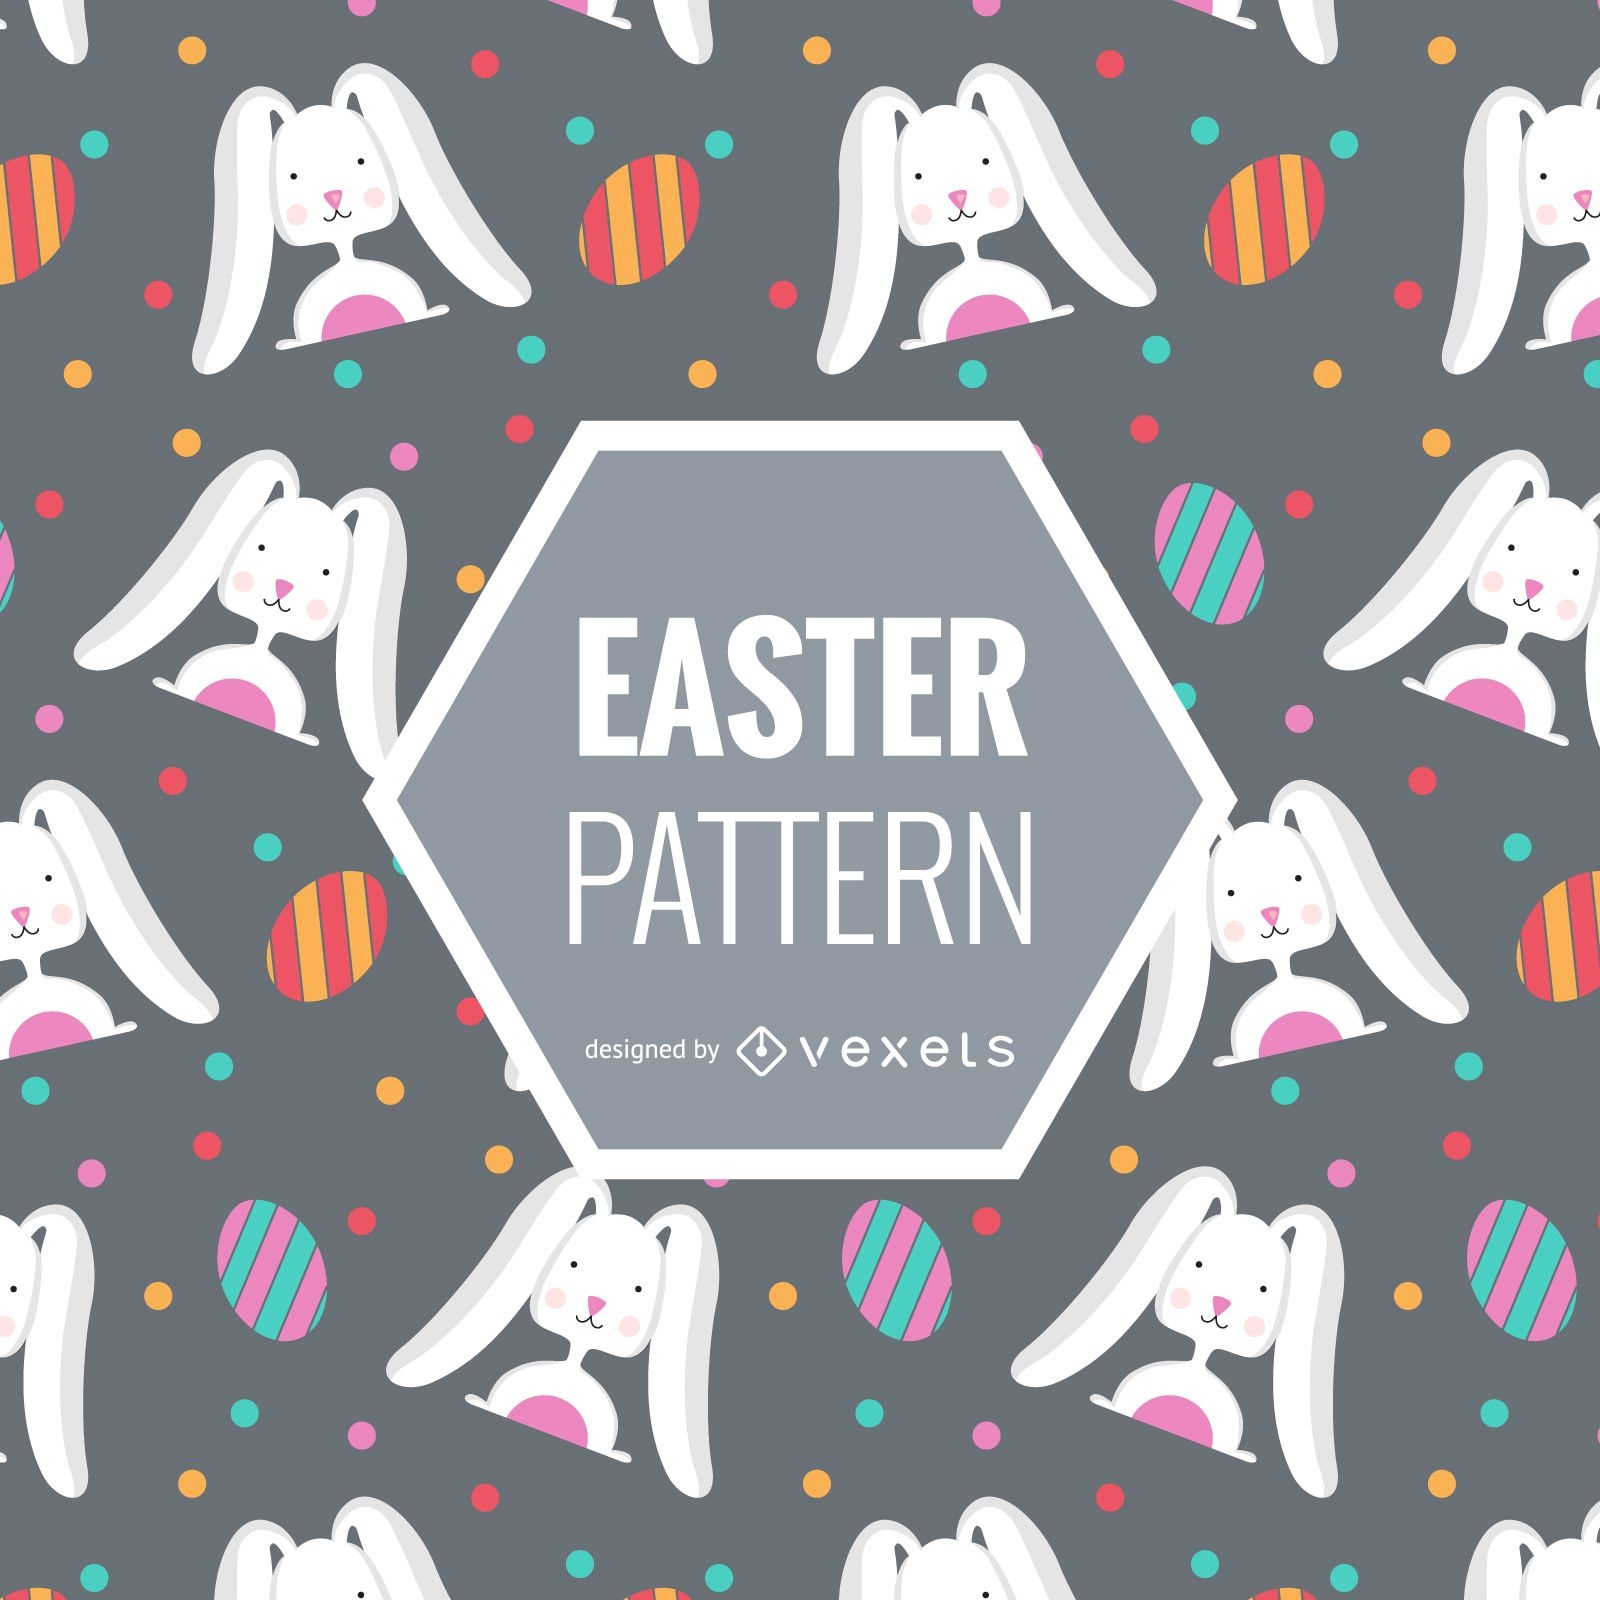 Easter pattern with bunnies and eggs